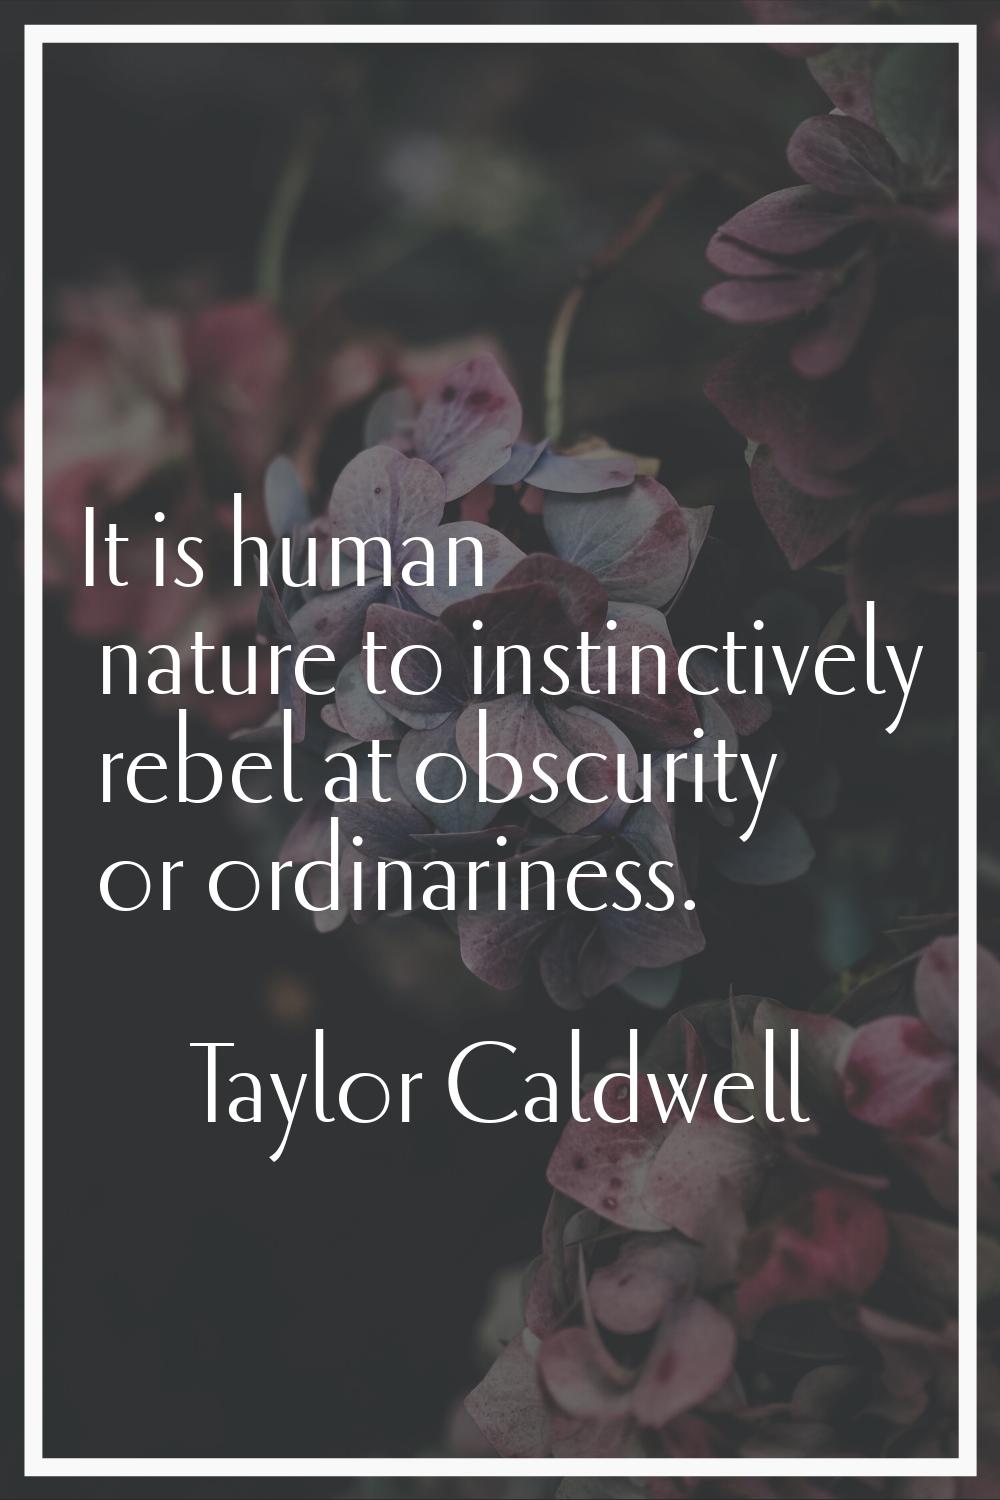 It is human nature to instinctively rebel at obscurity or ordinariness.